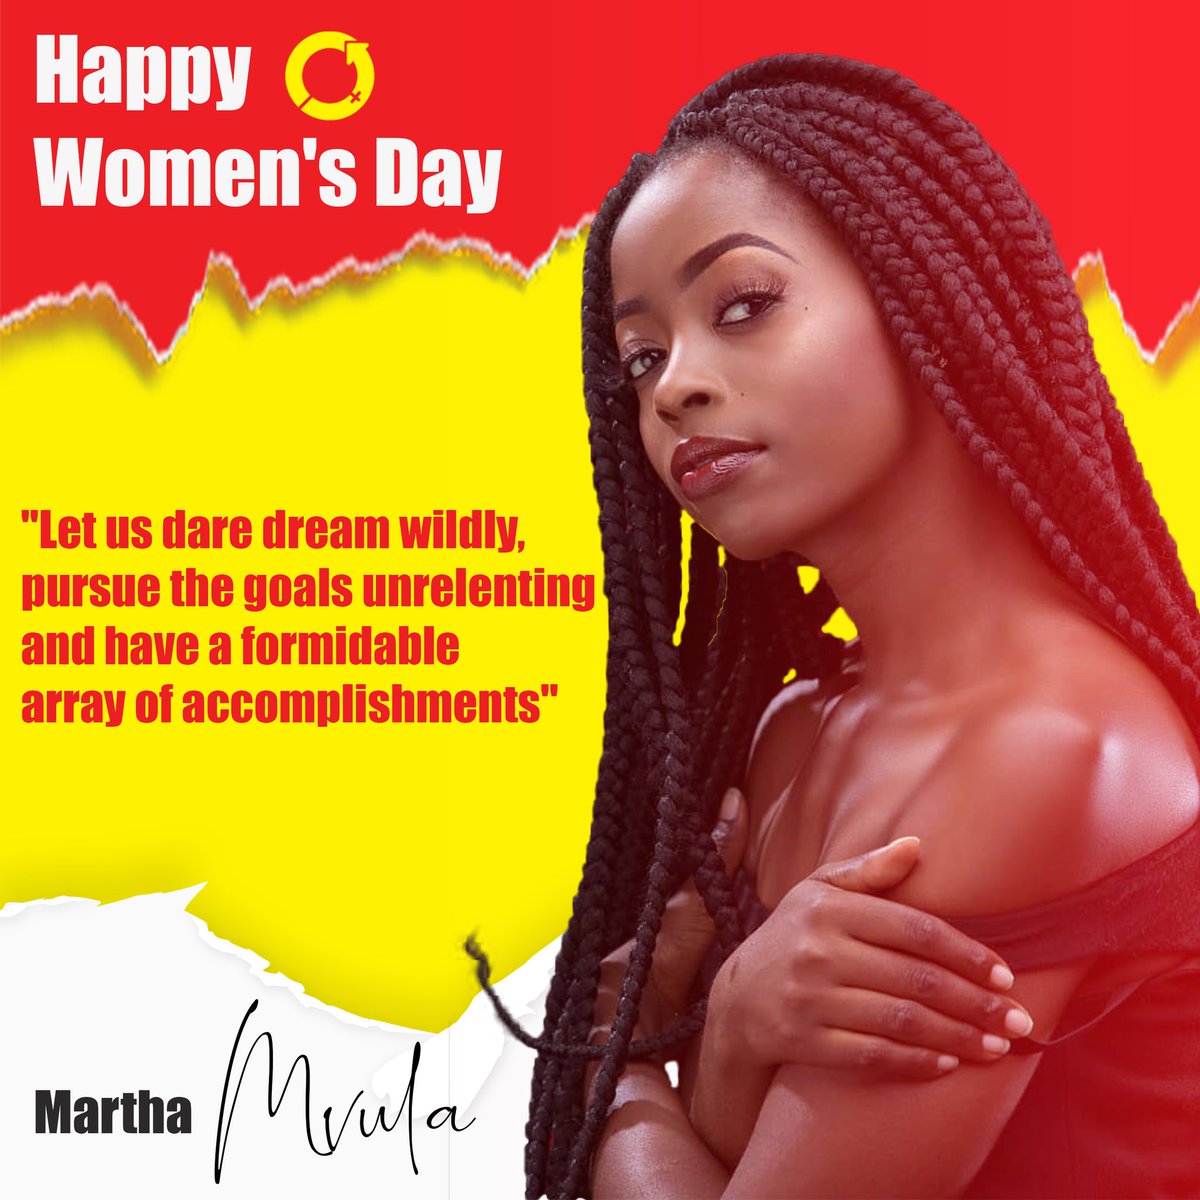 #ZedTwitter 
A big shout out to this amazing multi-talented  @martha_mvula  a children and women's rights activist, Actress, singer and song writer.
You're amazing ♥️
Let's retweet and follow her🙏
#lusaka #actress
#womemsupportingwomen 💪